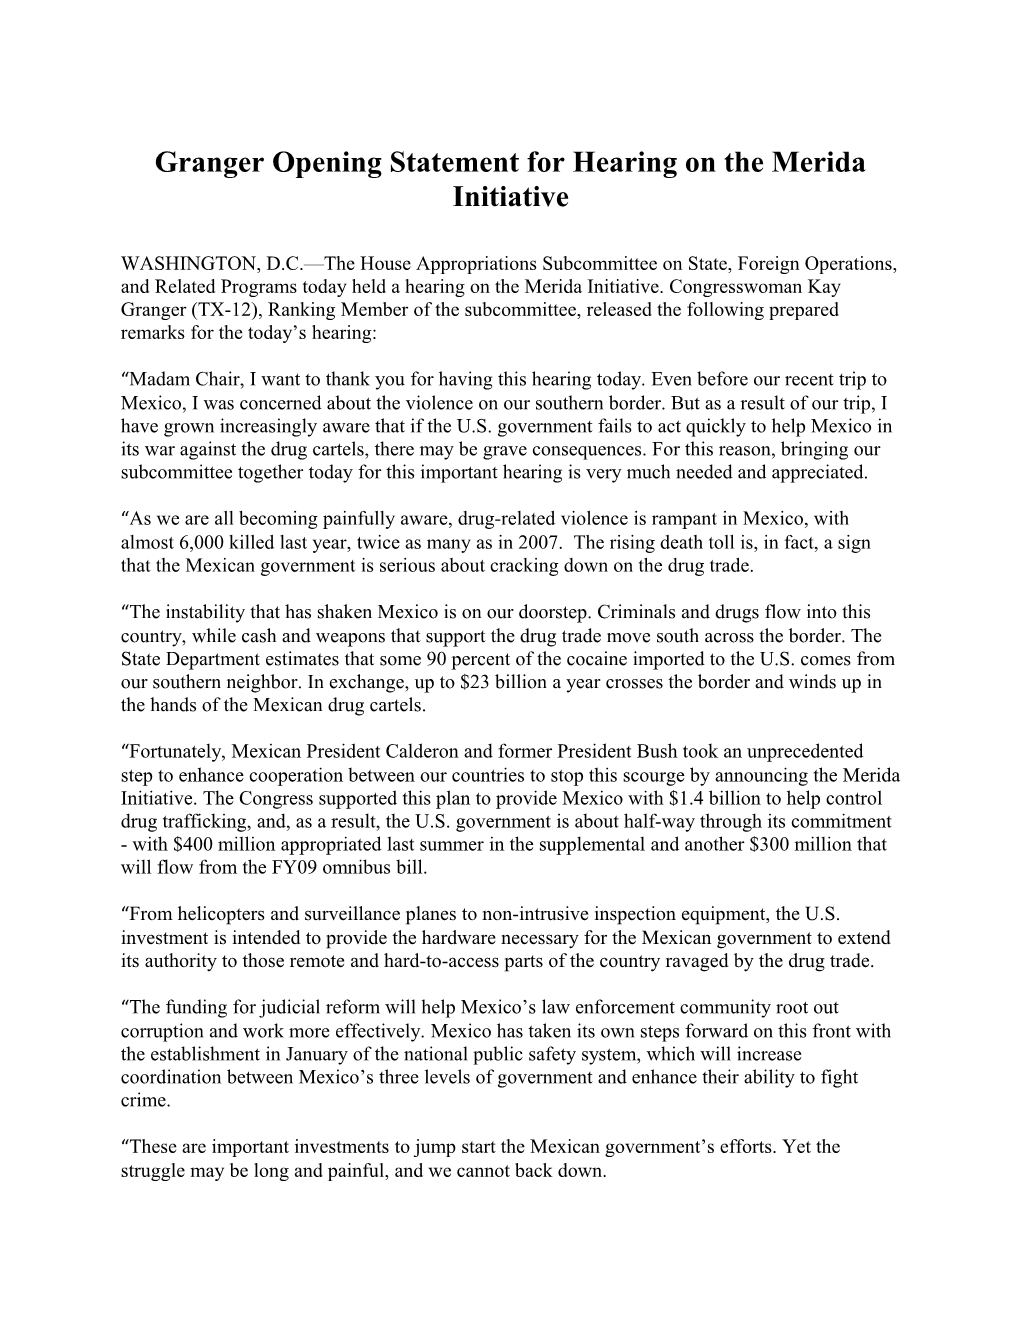 Granger Opening Statement for Hearing on the Merida Initiative